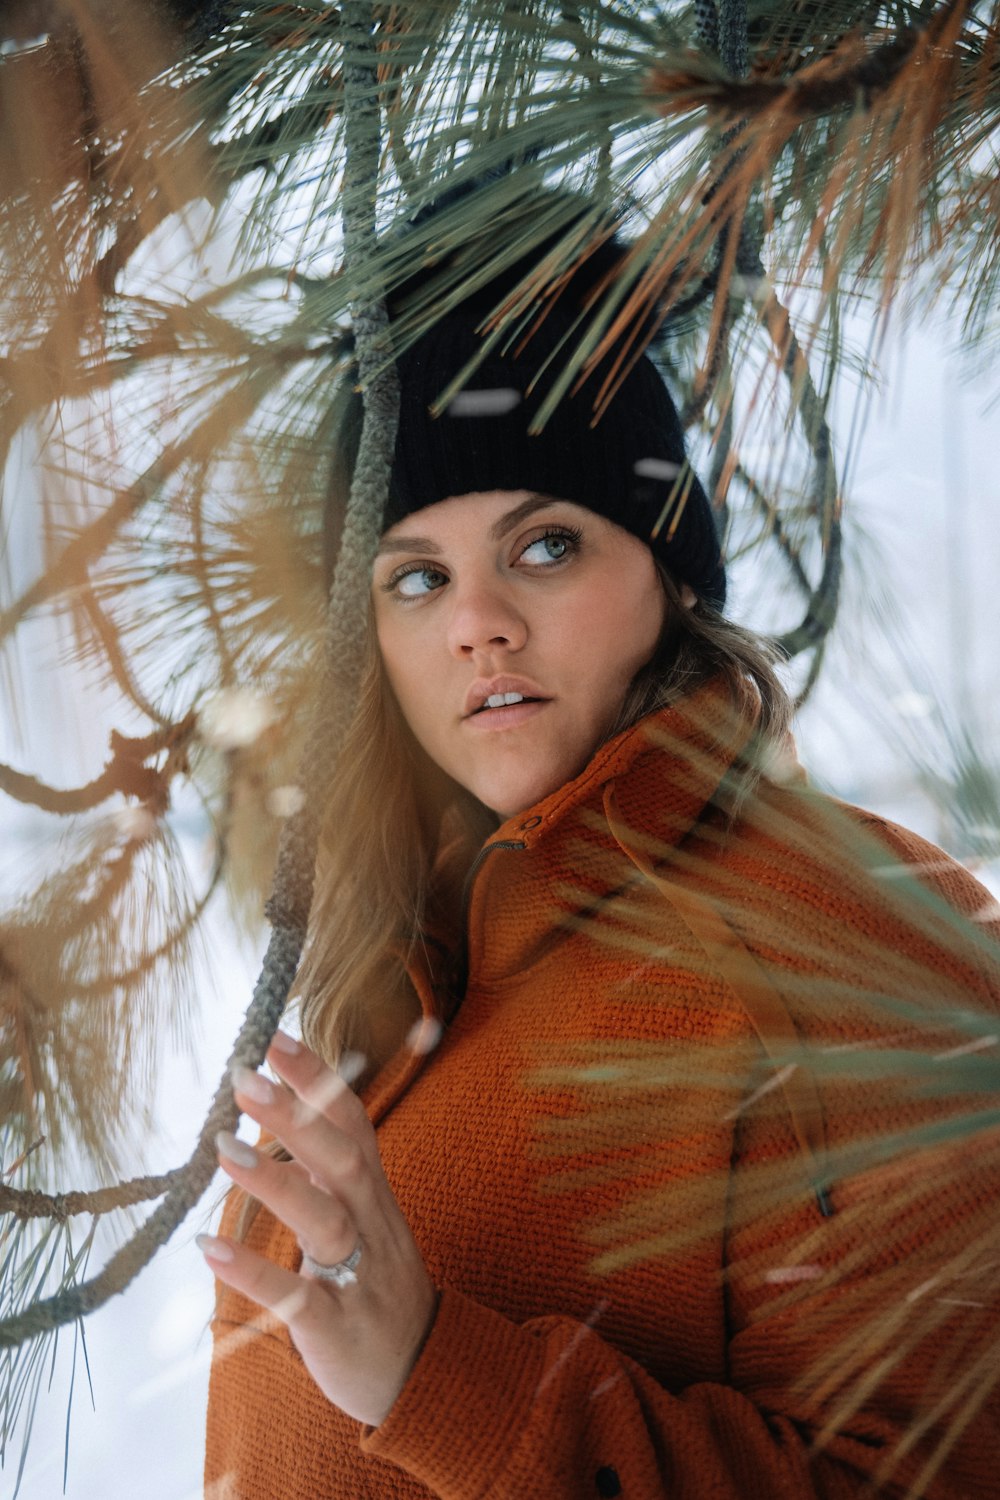 a woman in an orange coat holding a pine tree